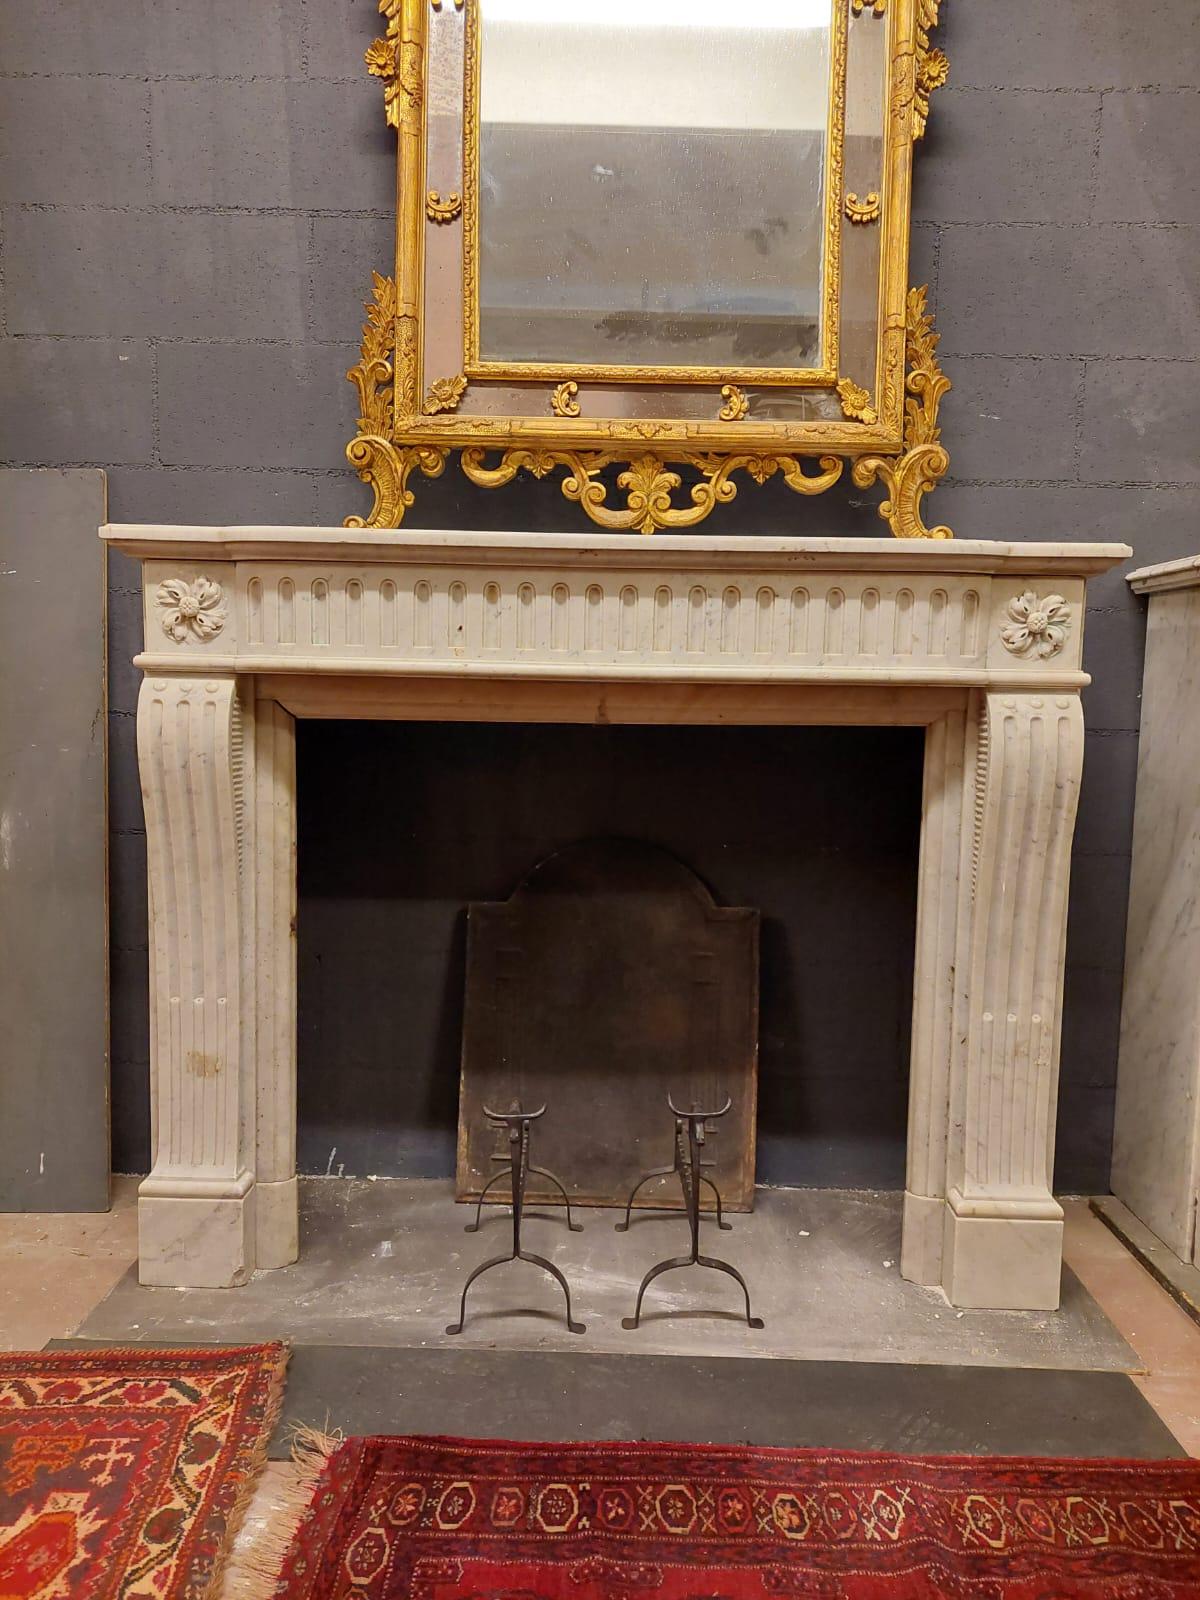 Antique fireplace mantle, hand-sculpted in precious and solid white Carrara marble, carved with lateral flowers and typical decorations on the sides and pediment, from France from the 18th century, maximum dimensions cm W 136 x H 107 x D 41,